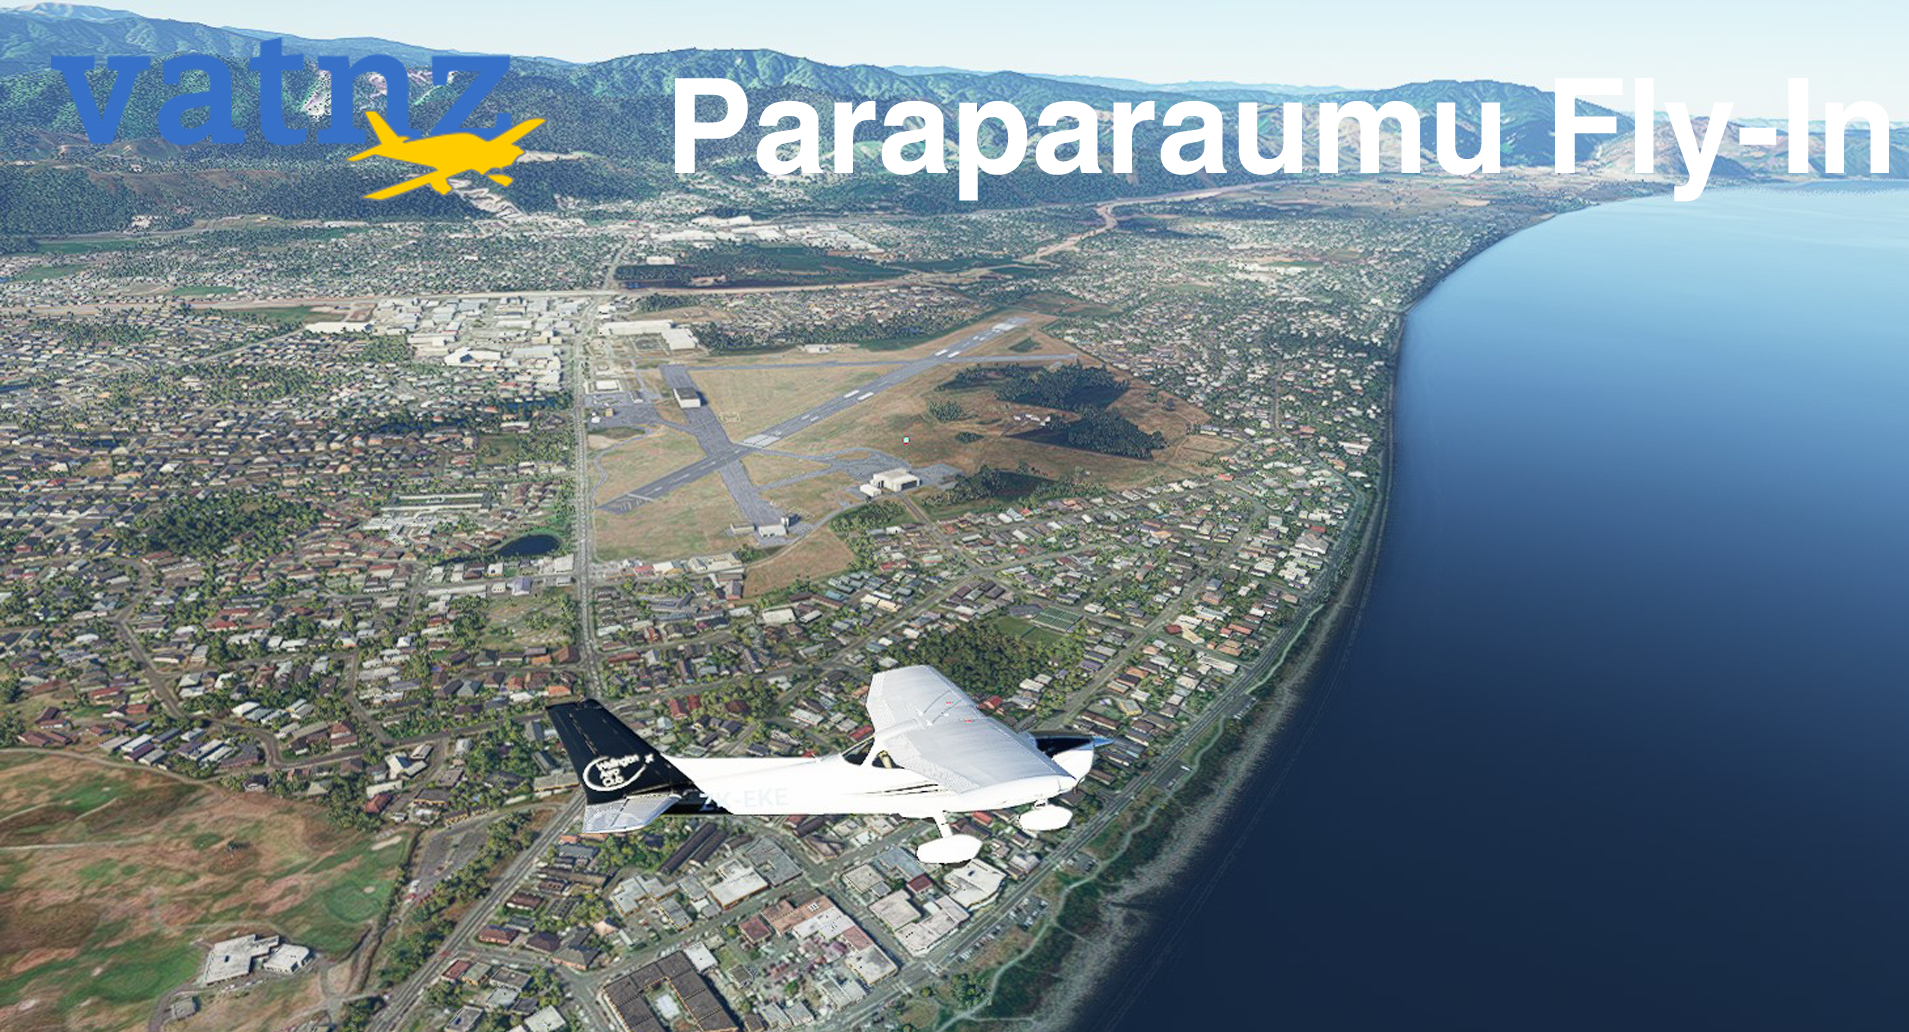 Paraparaumu Fly-in